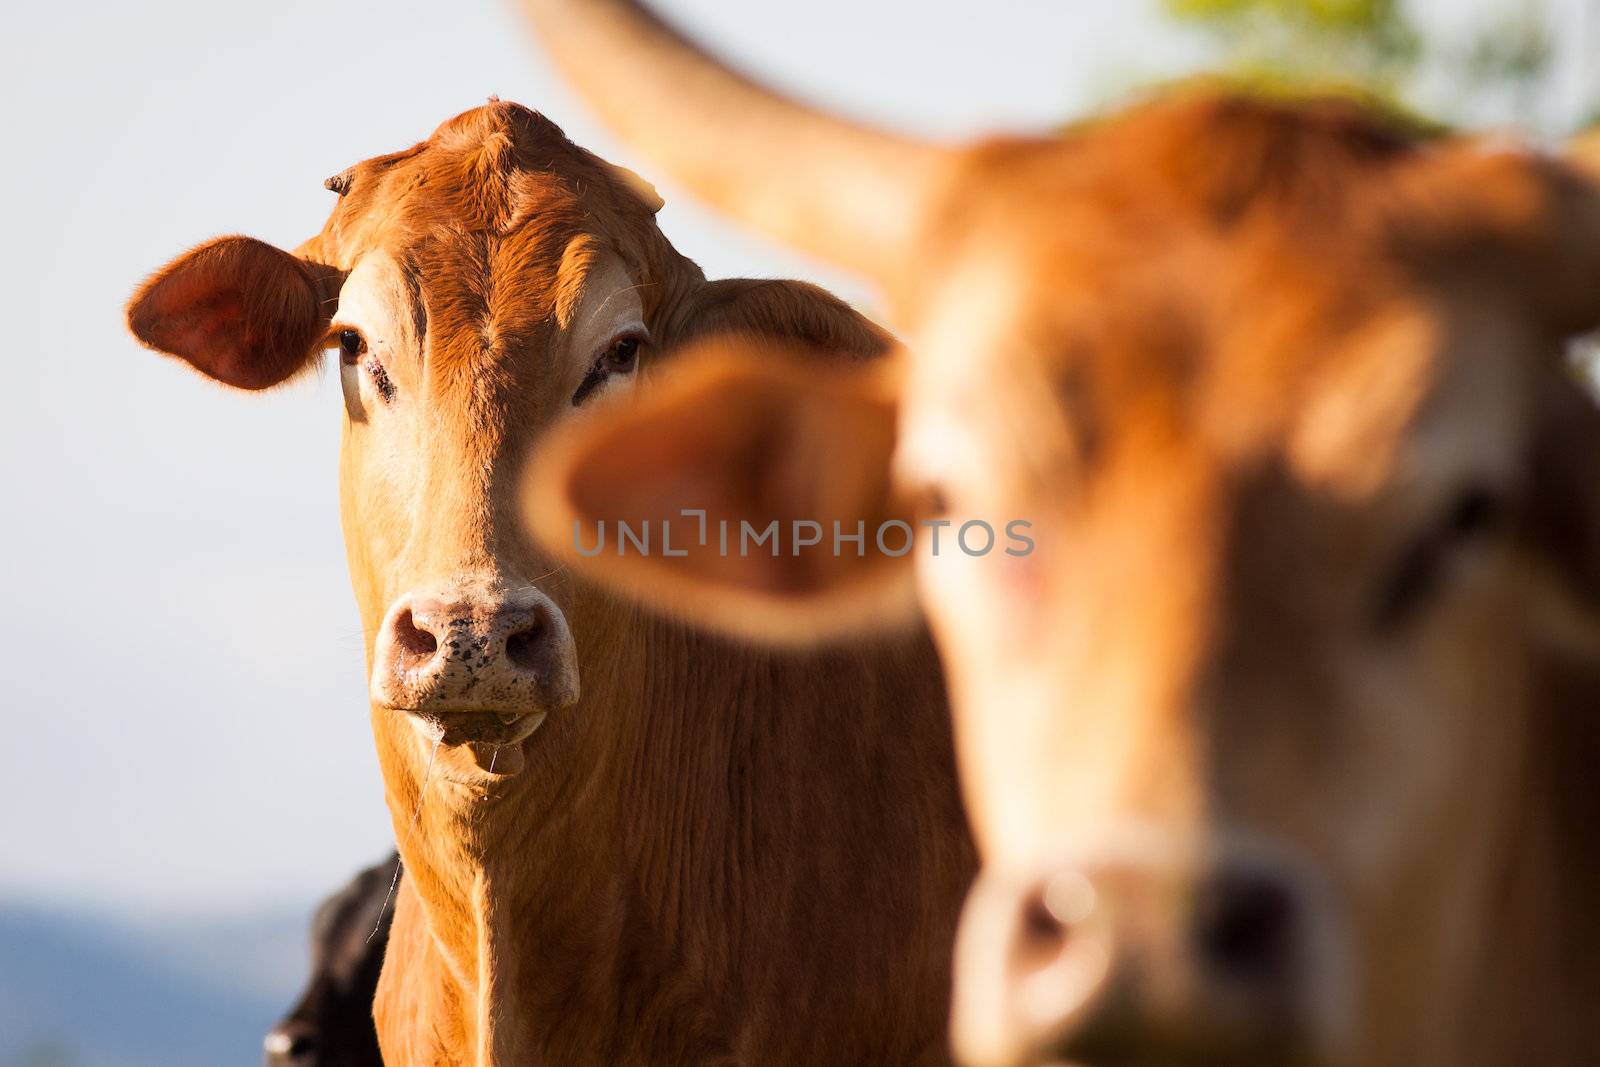 Two cows looking at camera outdoors, Queensland, Australia